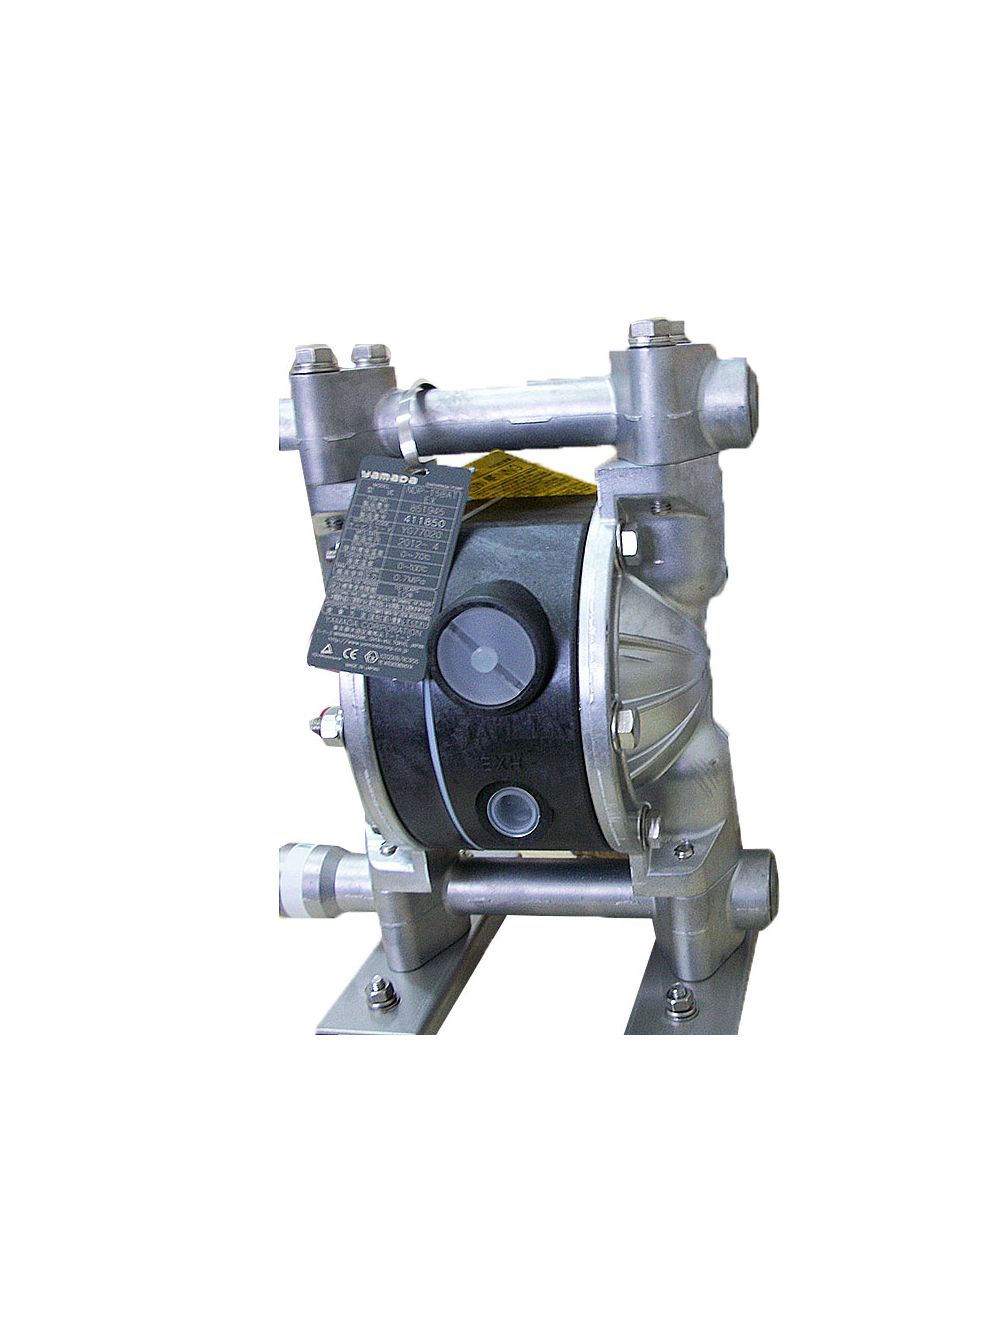 New In stock for sale, yamada Diaphragm Pump NDP-15BAS